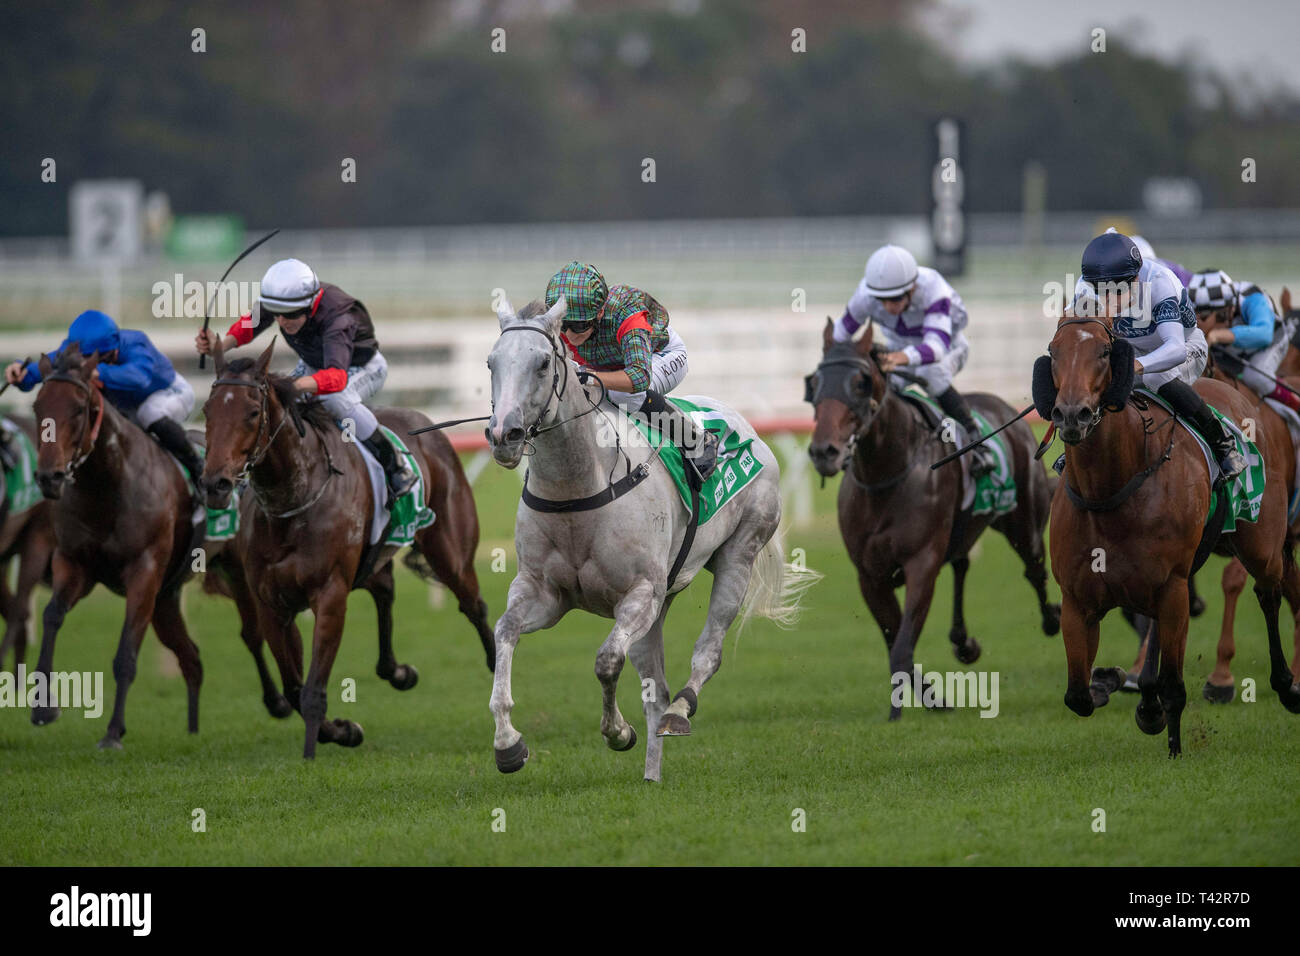 Sydney, USA. 13th Apr, 2019. ROYAL RANDWICK, SYDNEY ''“ APRIL 13: White Moss, ridden by Kathy O'Hara wins the Tab Sapphire Stakes on second day of the Championships at Royal Randwick Racecourse in Sydney. Michael McInally/Eclipse Sportswire/CSM/Alamy Live News Stock Photo